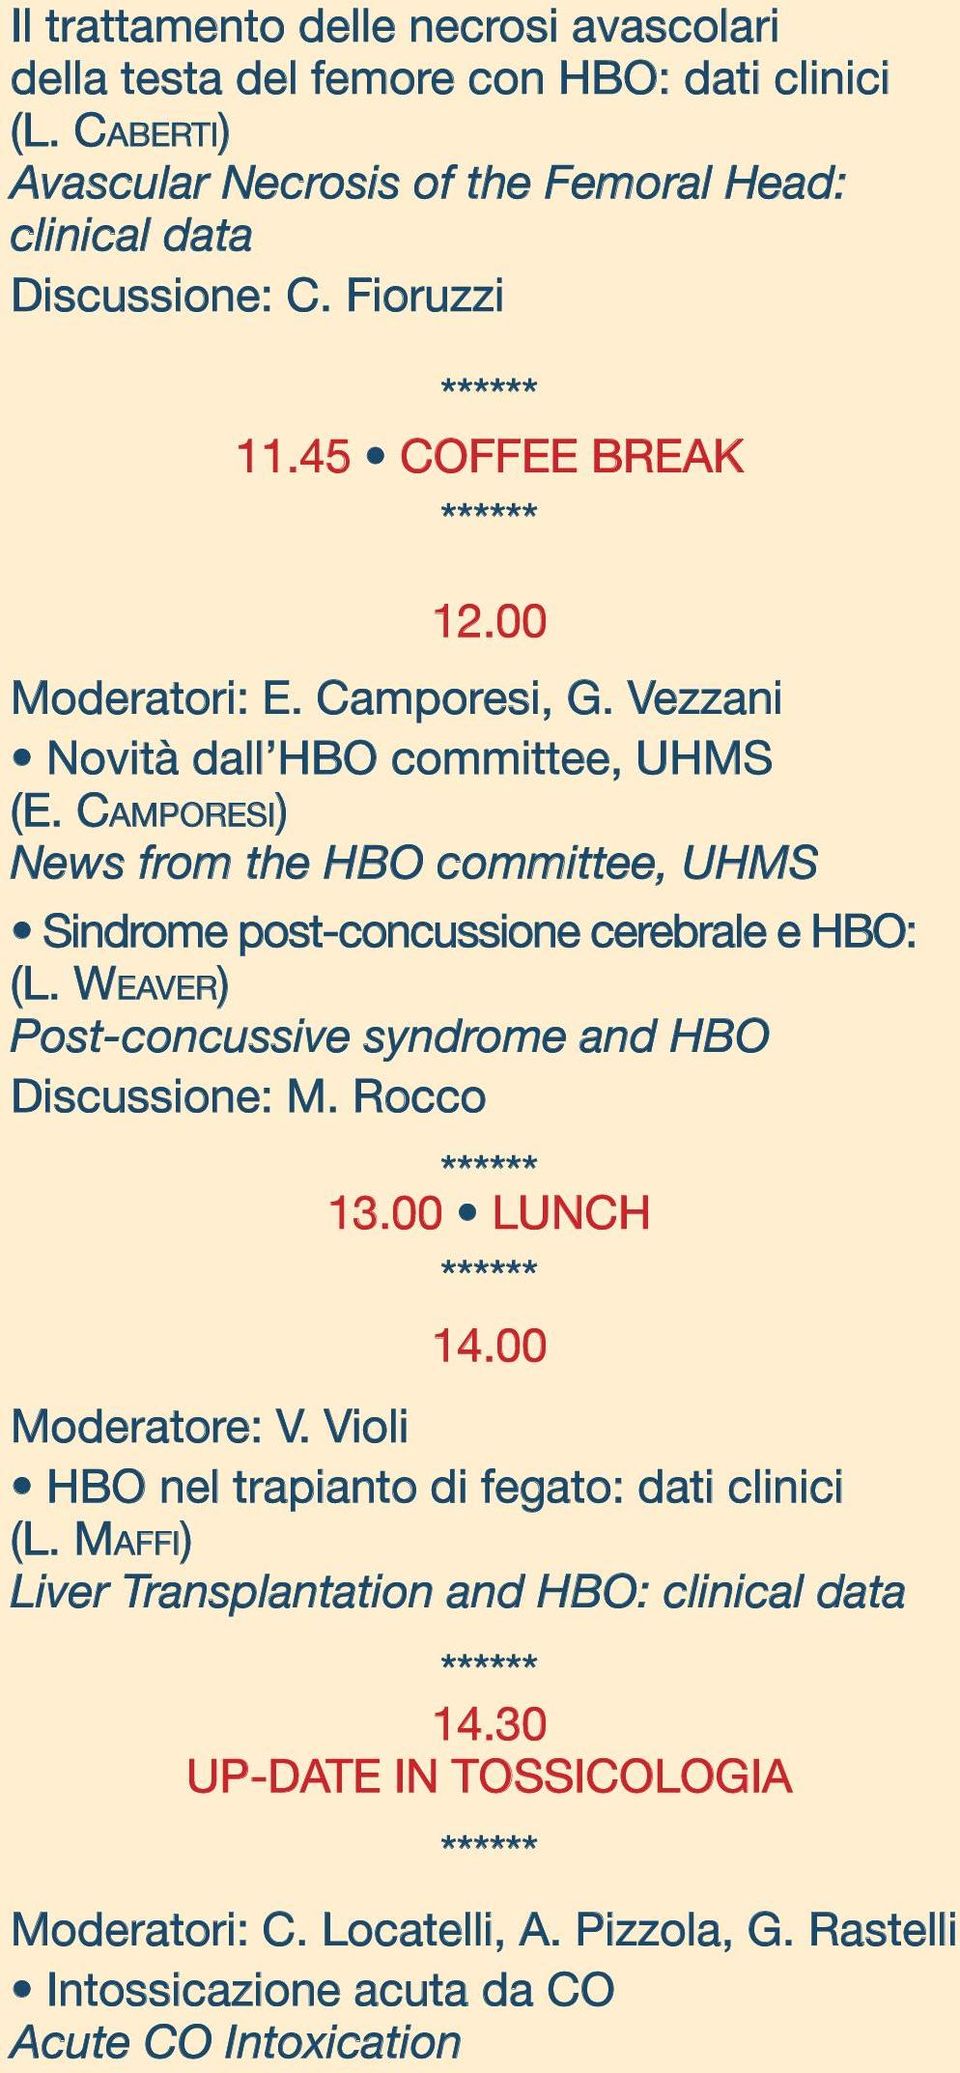 CAMPORESI) News from the HBO committee, UHMS Sindrome post-concussione cerebrale e HBO: (L. WEAVER) Post-concussive syndrome and HBO Discussione: M. Rocco 13.00 LUNCH 14.